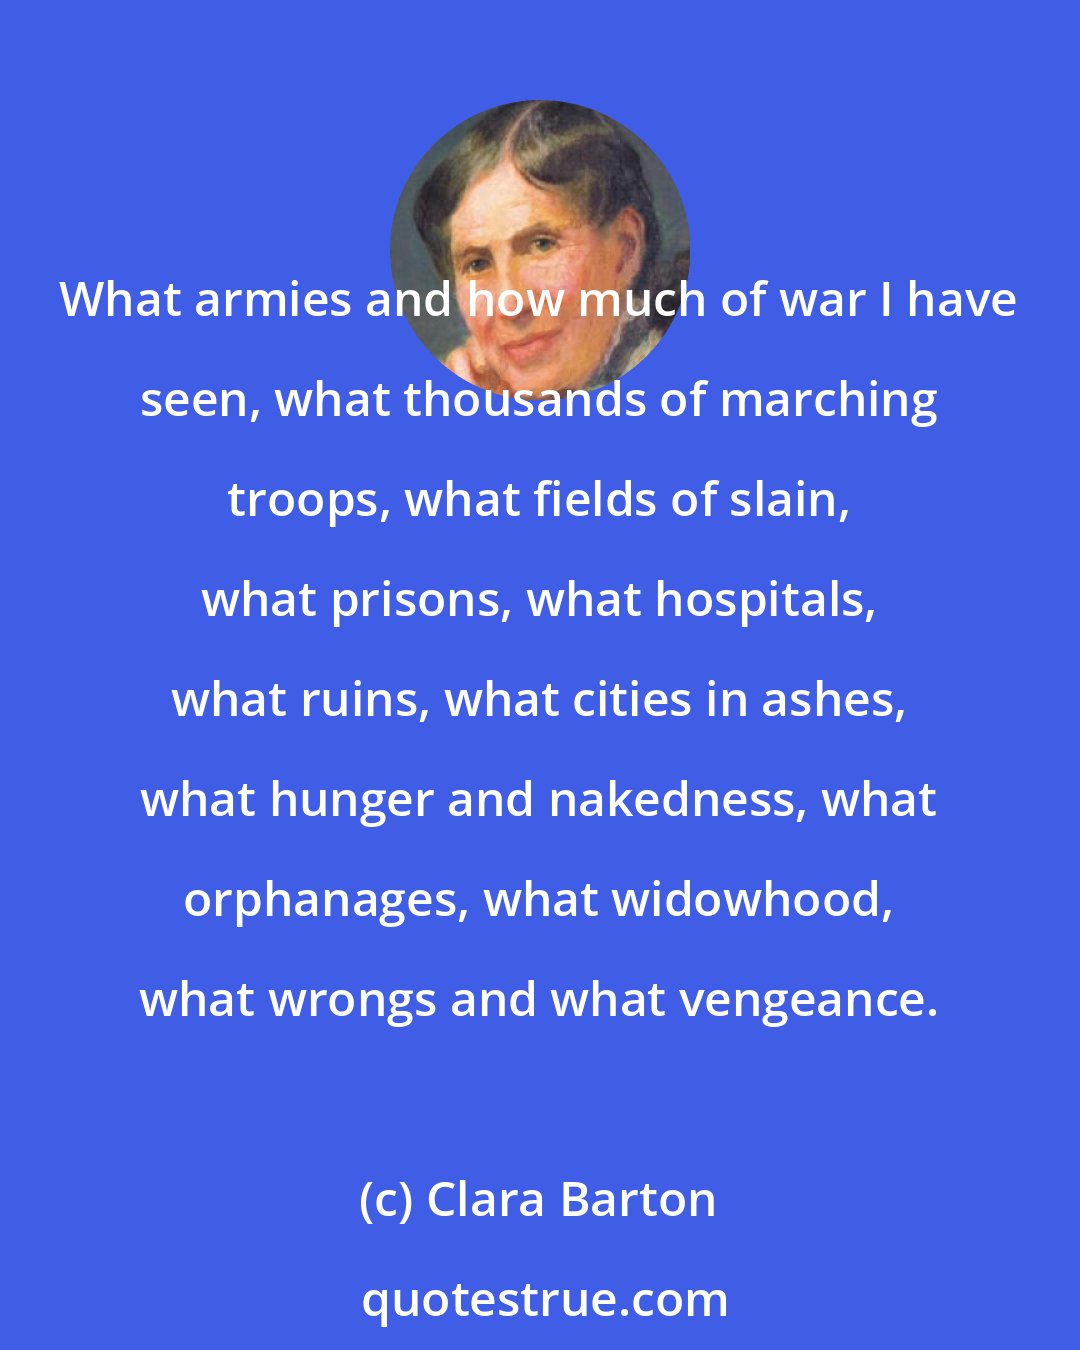 Clara Barton: What armies and how much of war I have seen, what thousands of marching troops, what fields of slain, what prisons, what hospitals, what ruins, what cities in ashes, what hunger and nakedness, what orphanages, what widowhood, what wrongs and what vengeance.